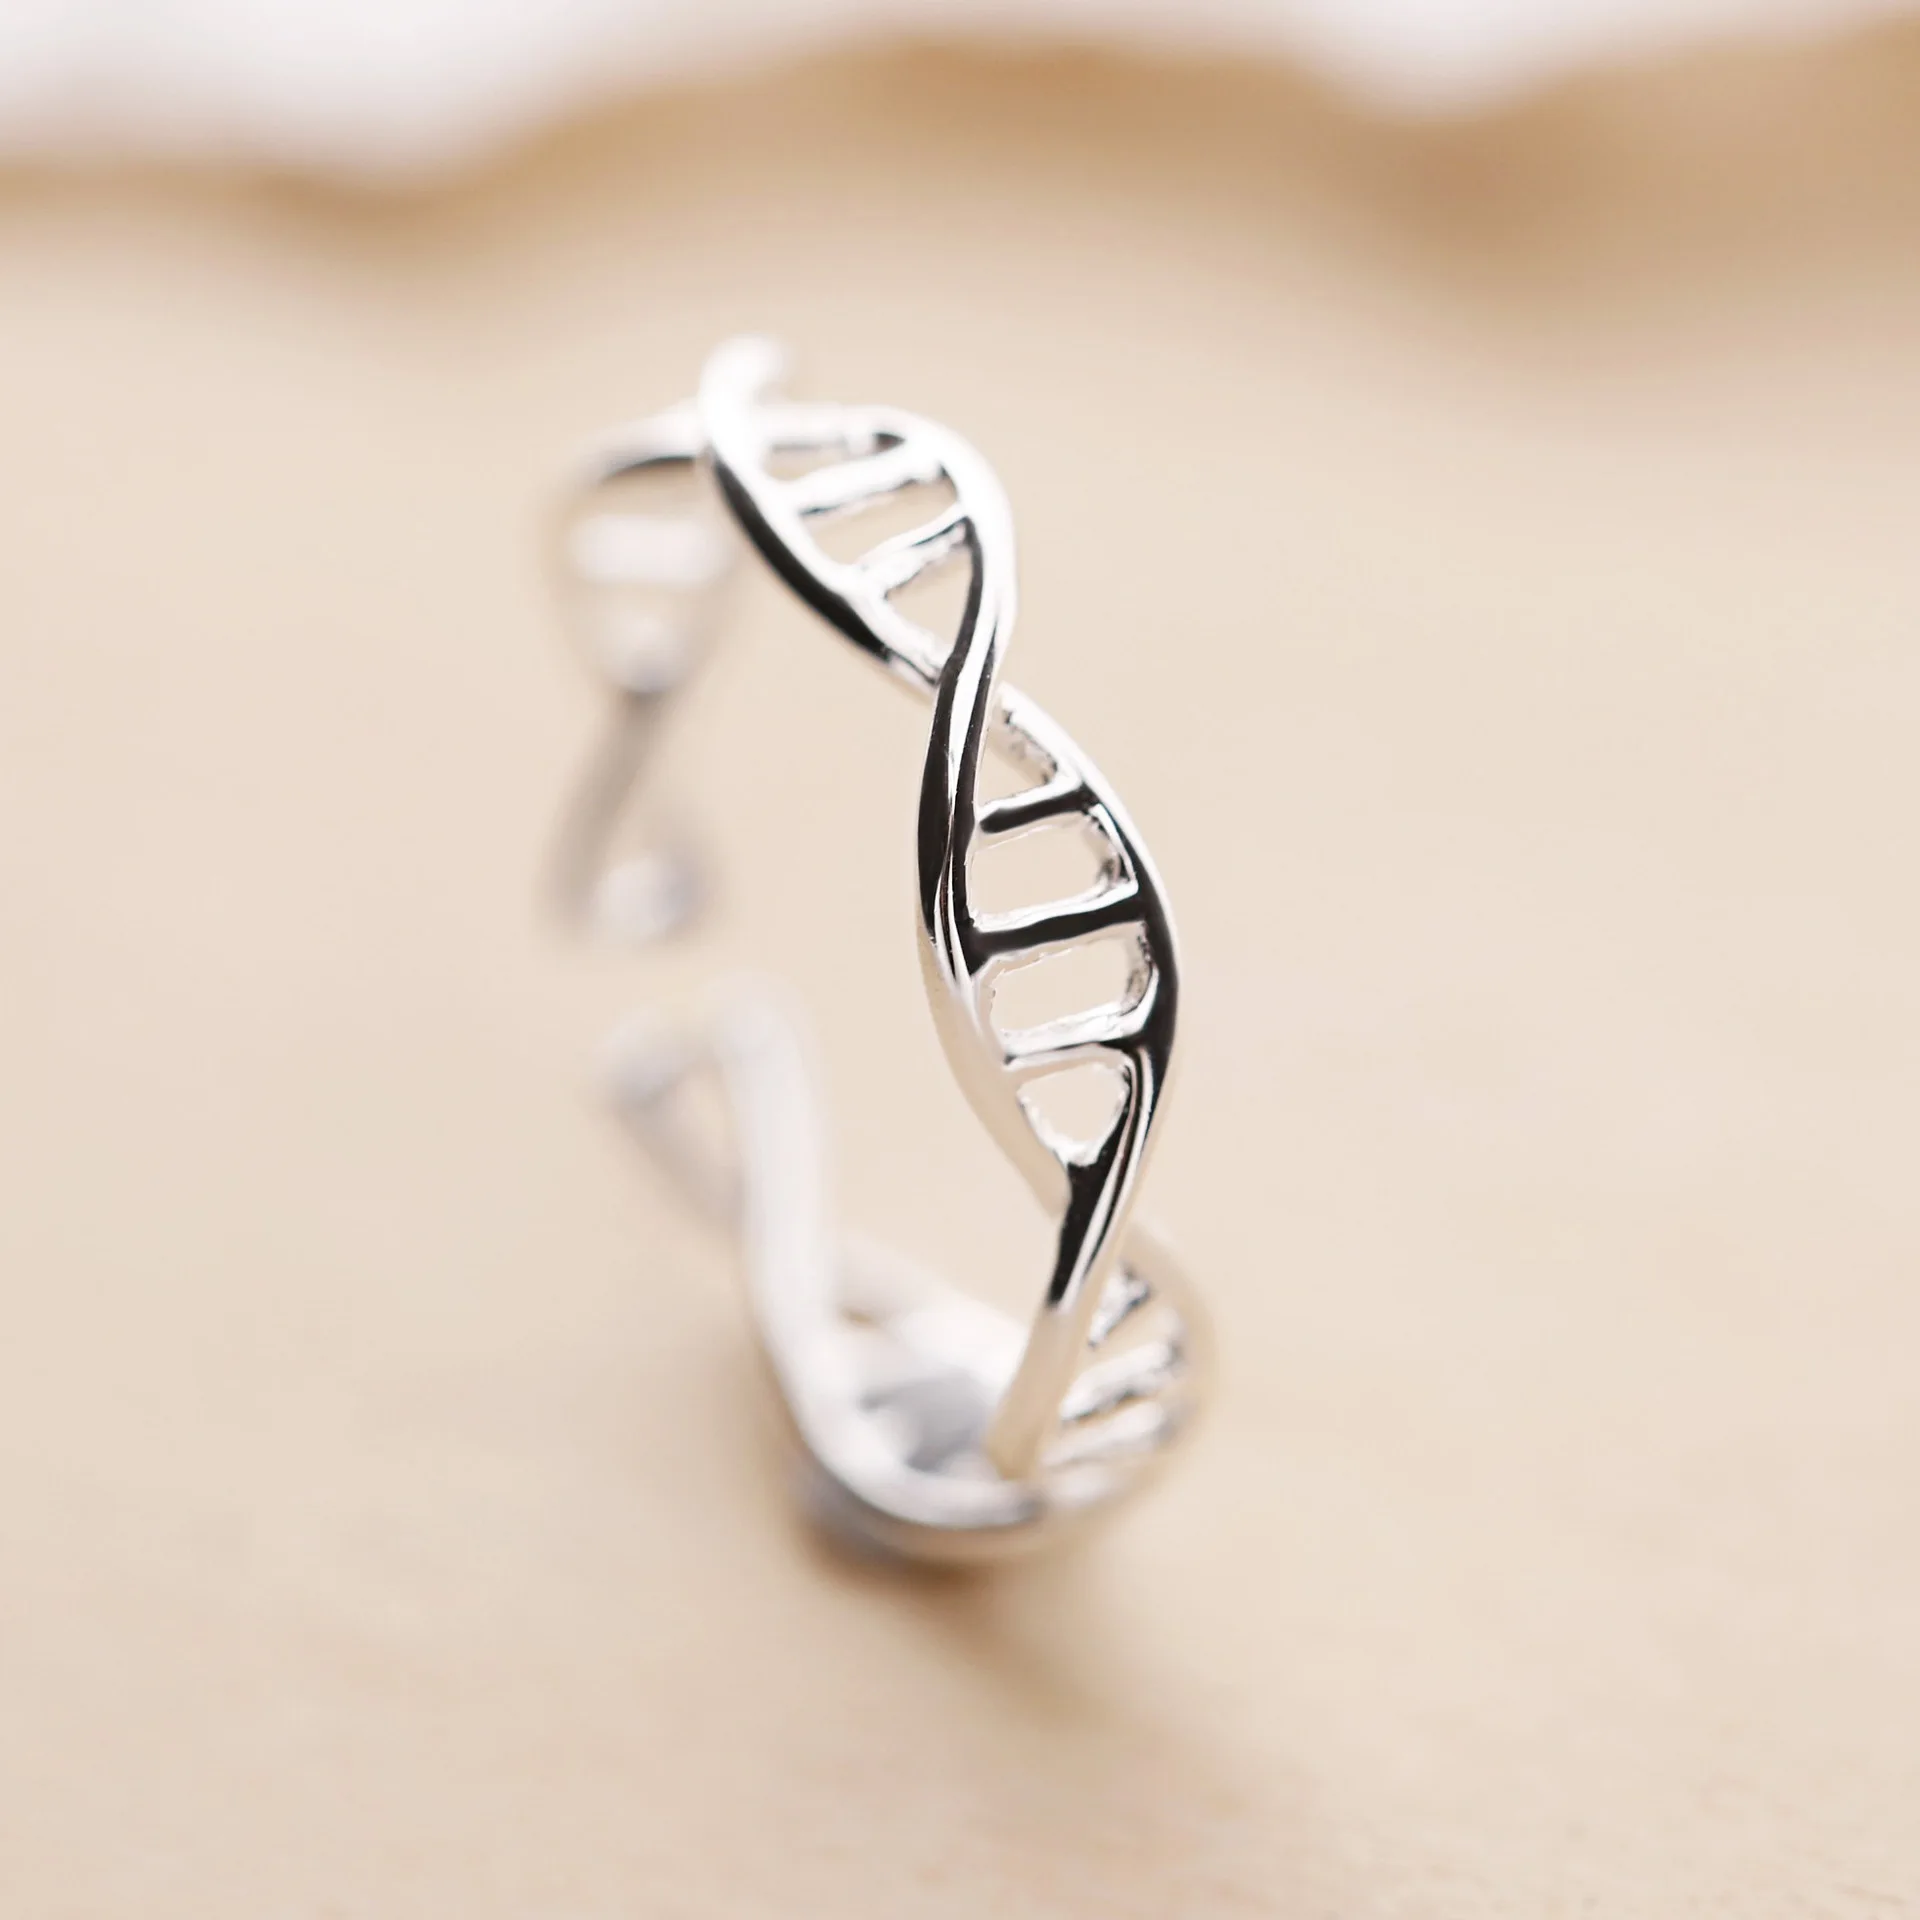 DNA screw Rings 100% Sterling 925 silver Jewelry  Vintage Adjustable rings for women gift